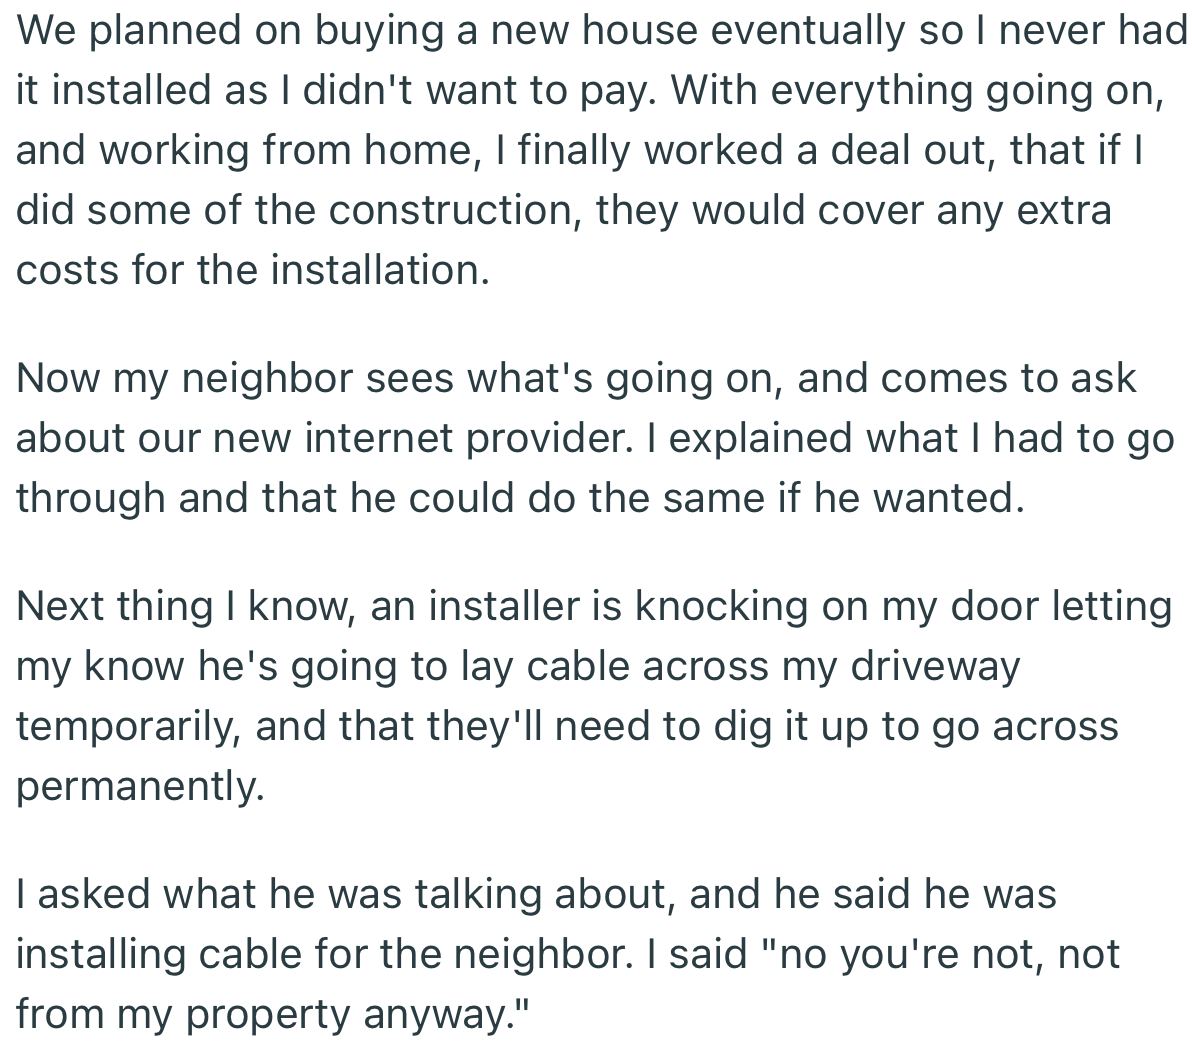 OP eventually went through with their plans, but in more difficult way. Years later, their neighbor decided to make their own installment, which needed to run through OP’s property. You best believe OP gave them a taste of their own medicine